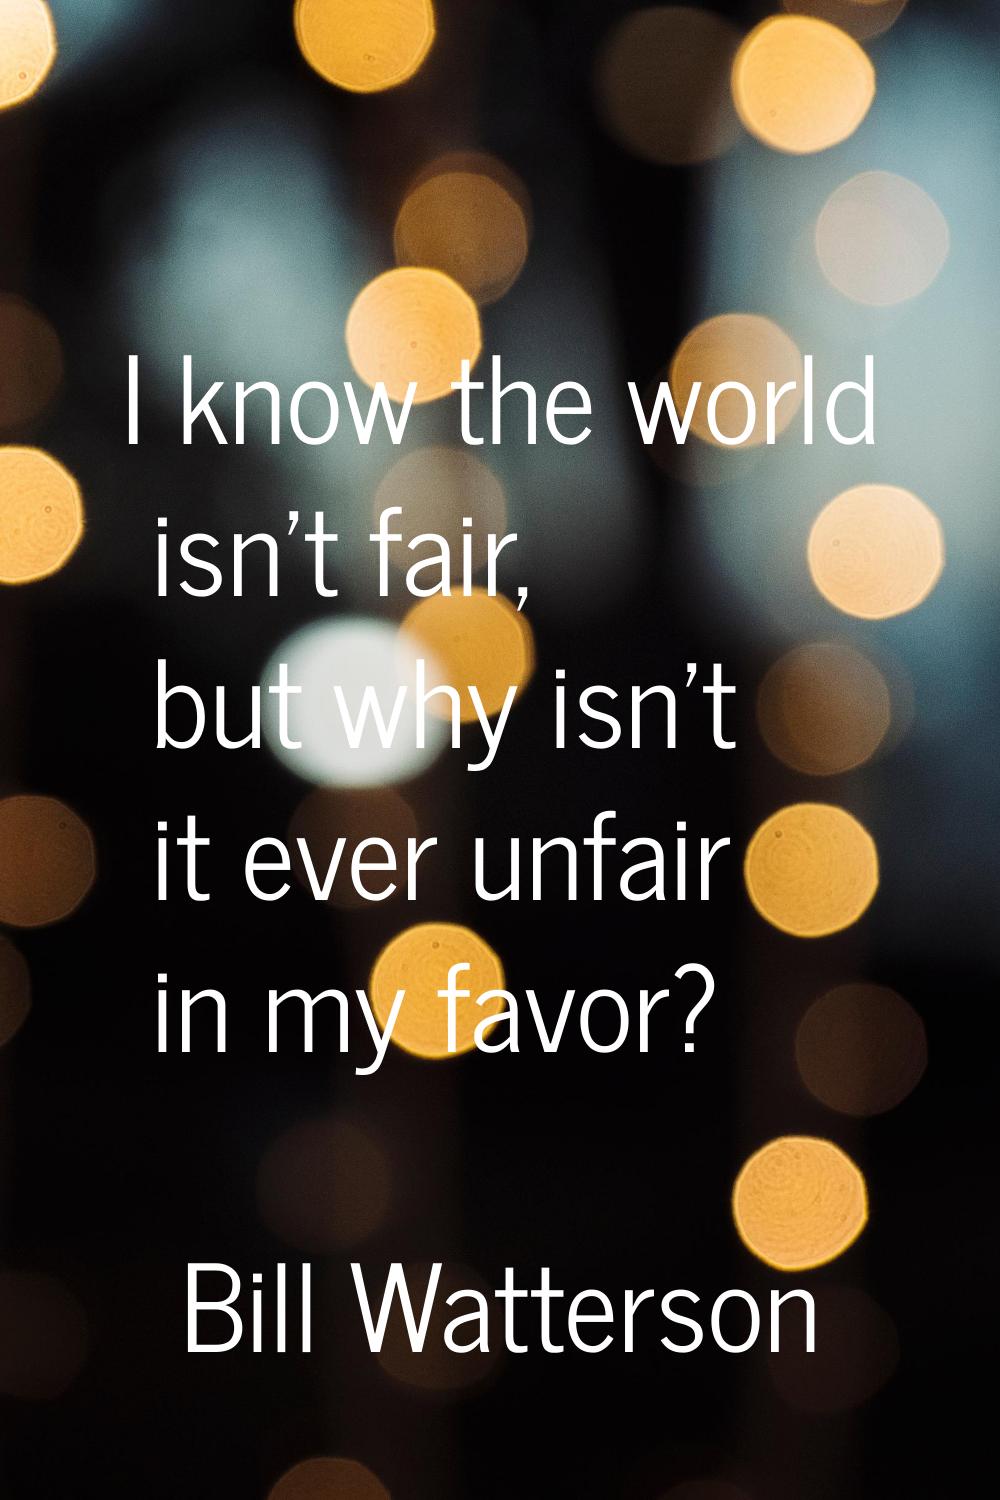 I know the world isn't fair, but why isn't it ever unfair in my favor?